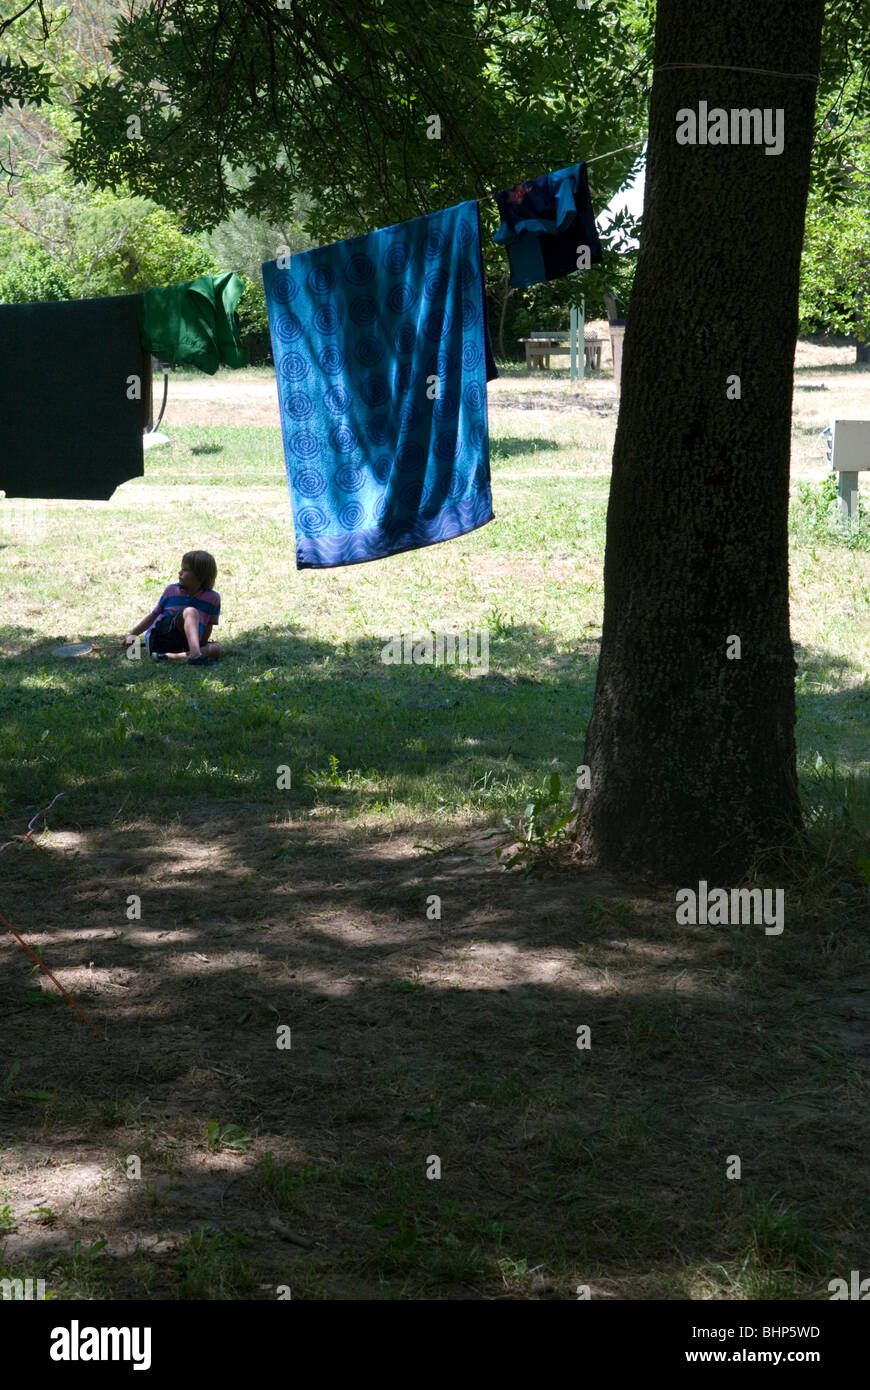 7 year old young boy with frisbee sits on grass in the shade beneath a washing line with drying towels on a campsite in france Stock Photo